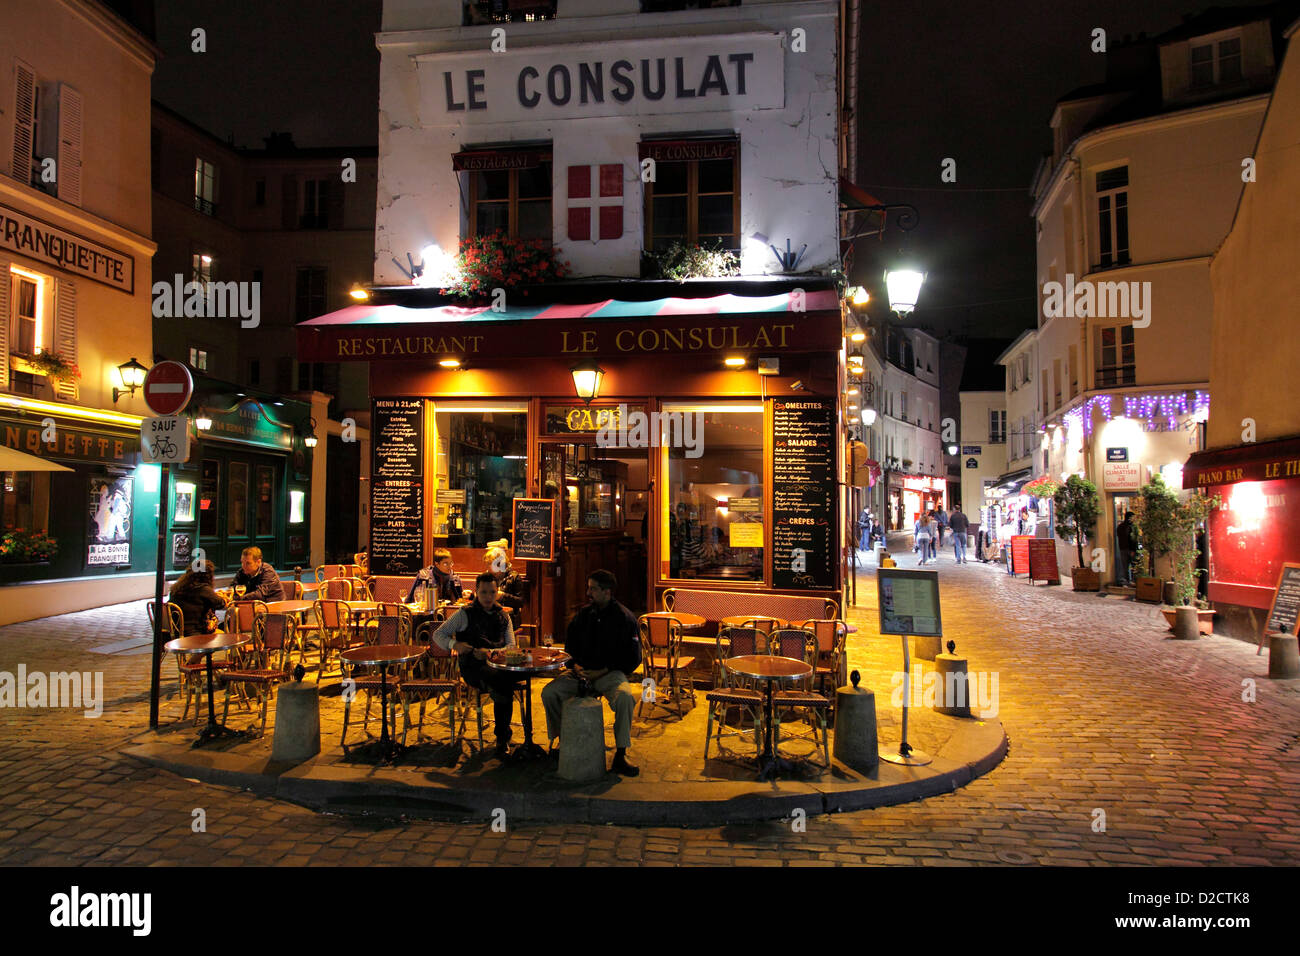 restaurant and café Le Consulat in Montmartre at night Stock Photo